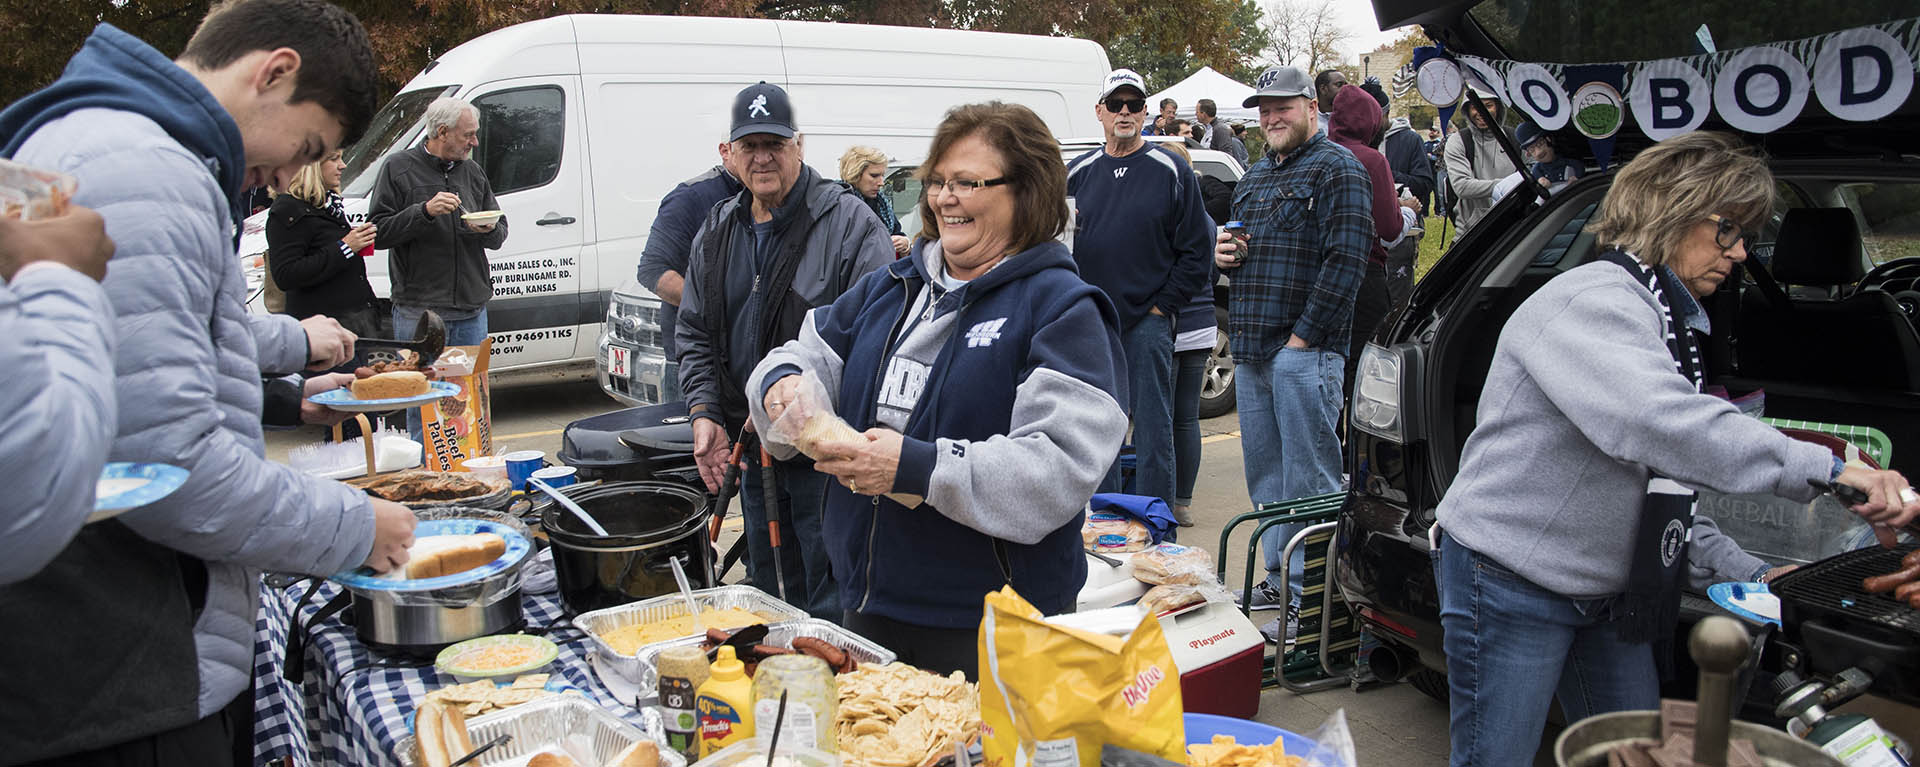 A mom prepares food at the football tailgate.